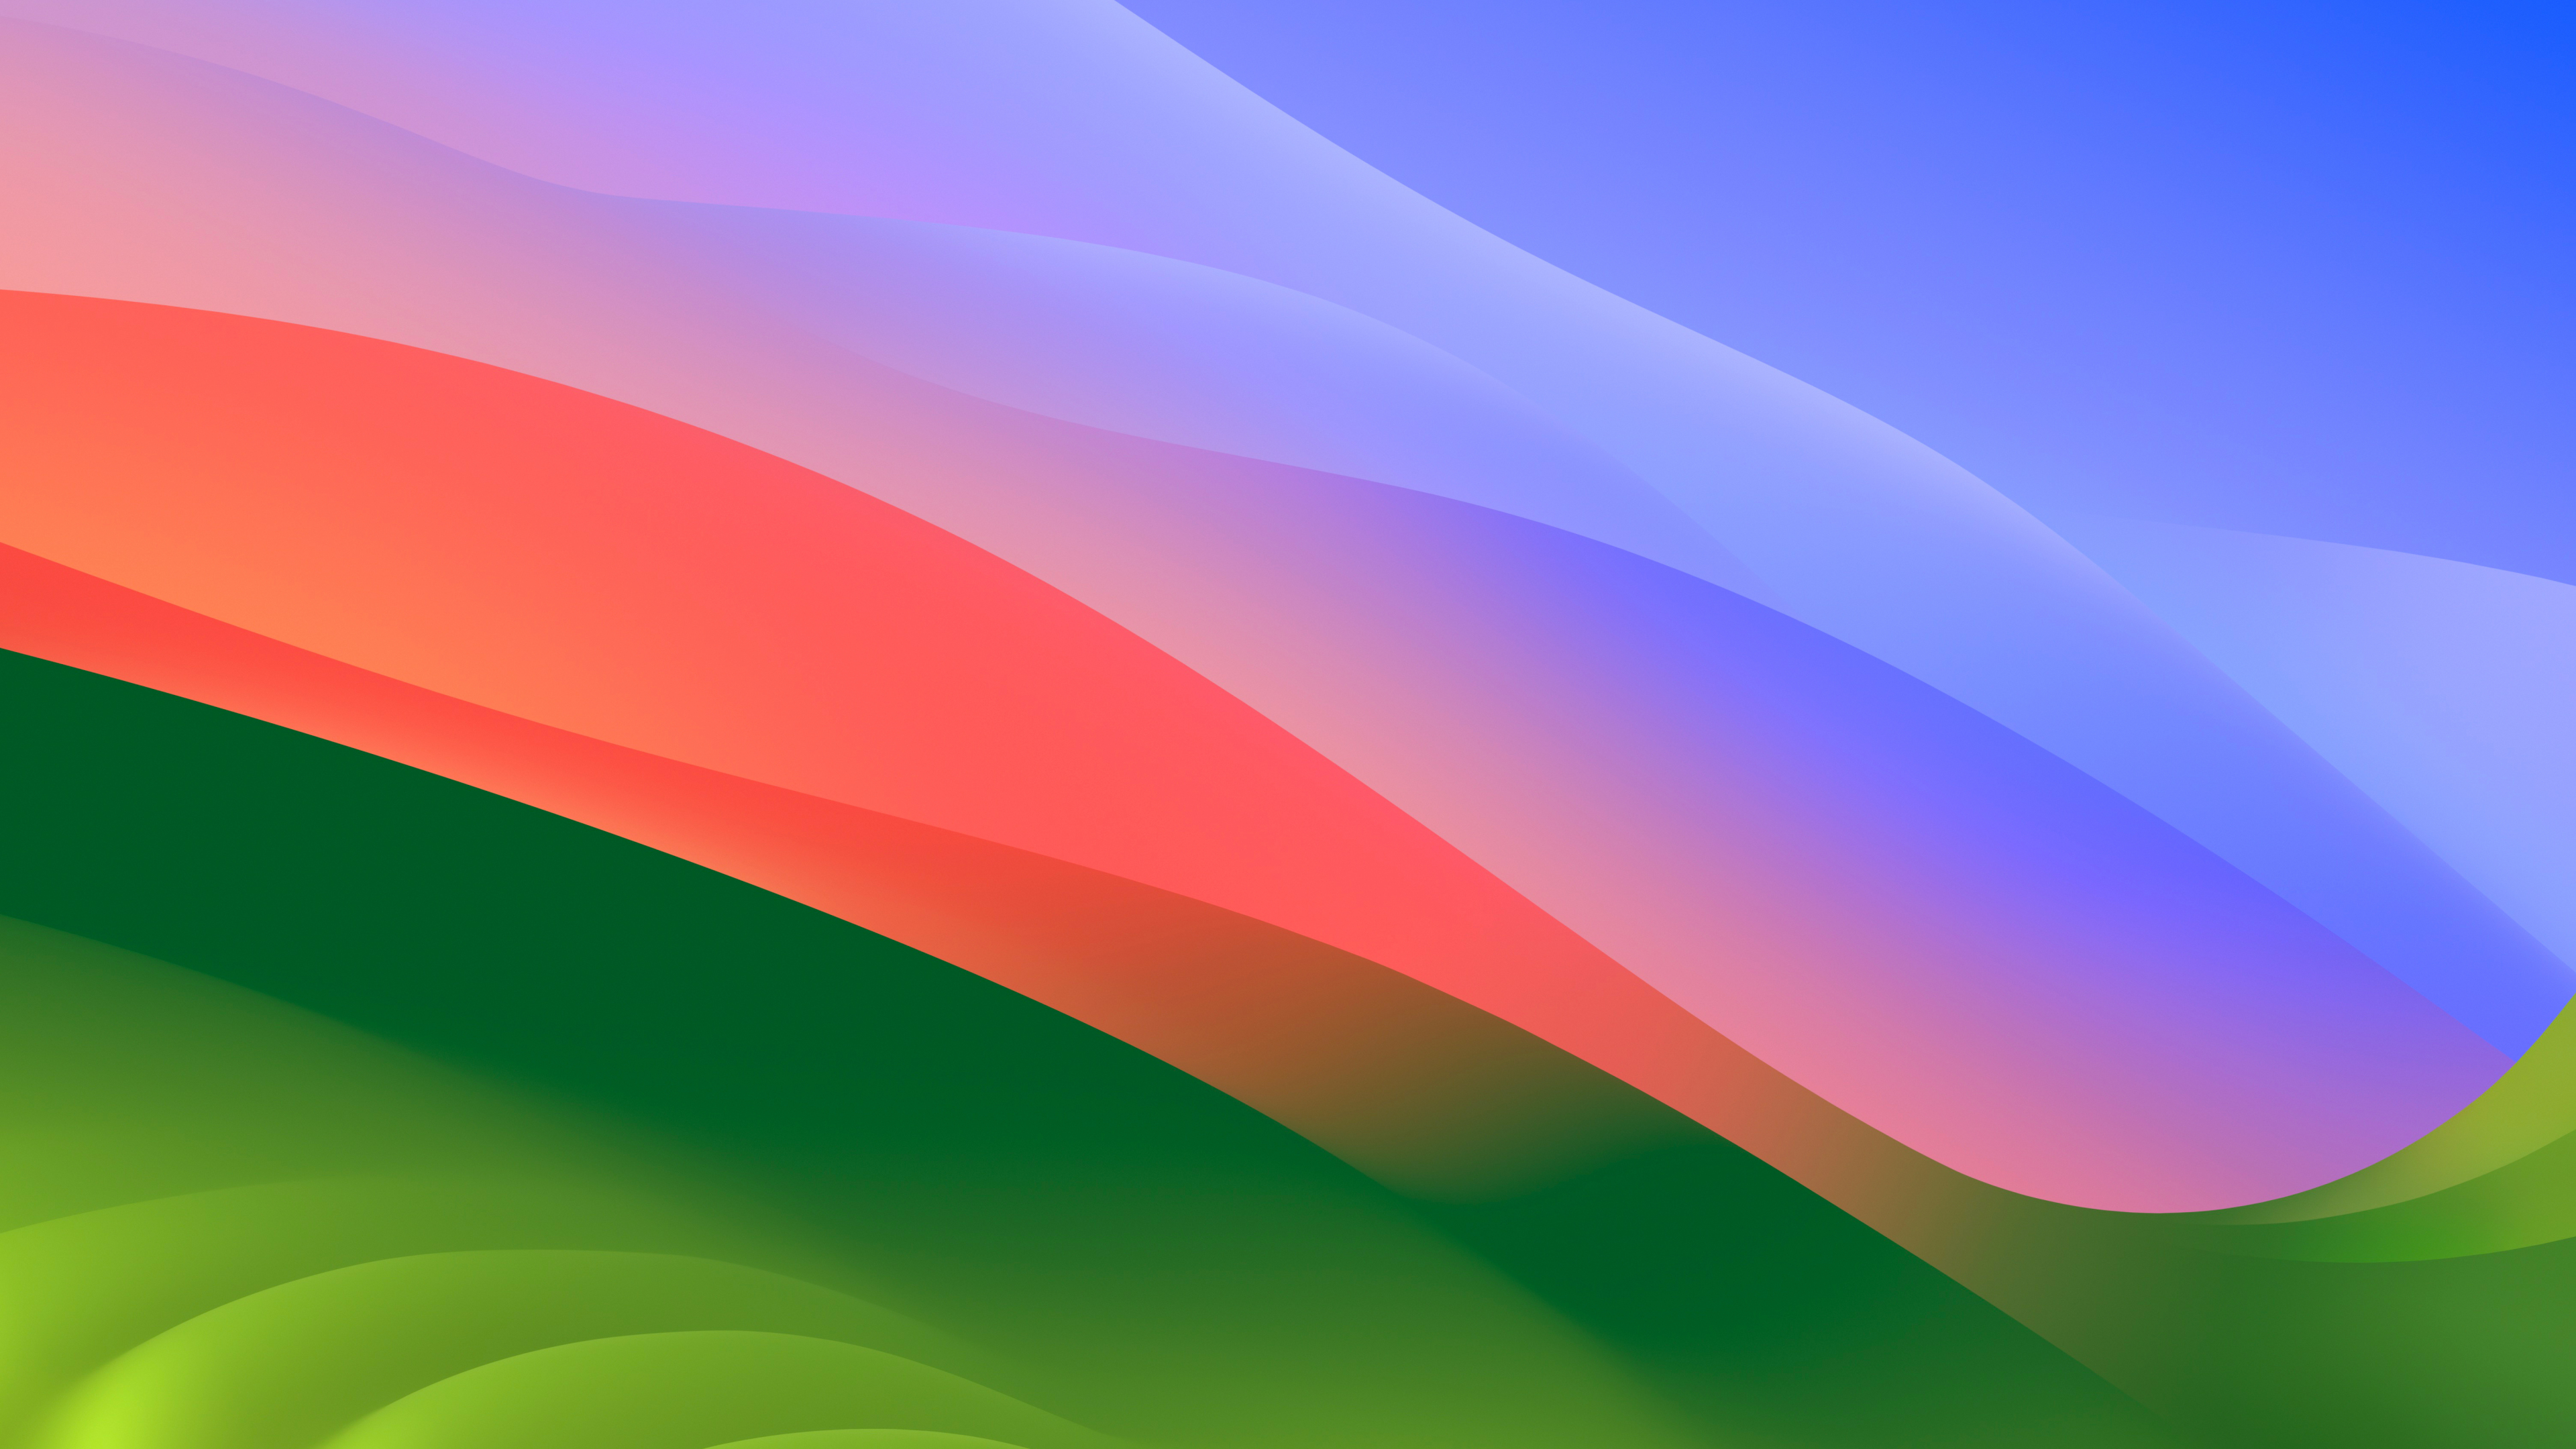 MacOS Sonoma, colorful waves, stock photo, 3840x2160 wallpaper